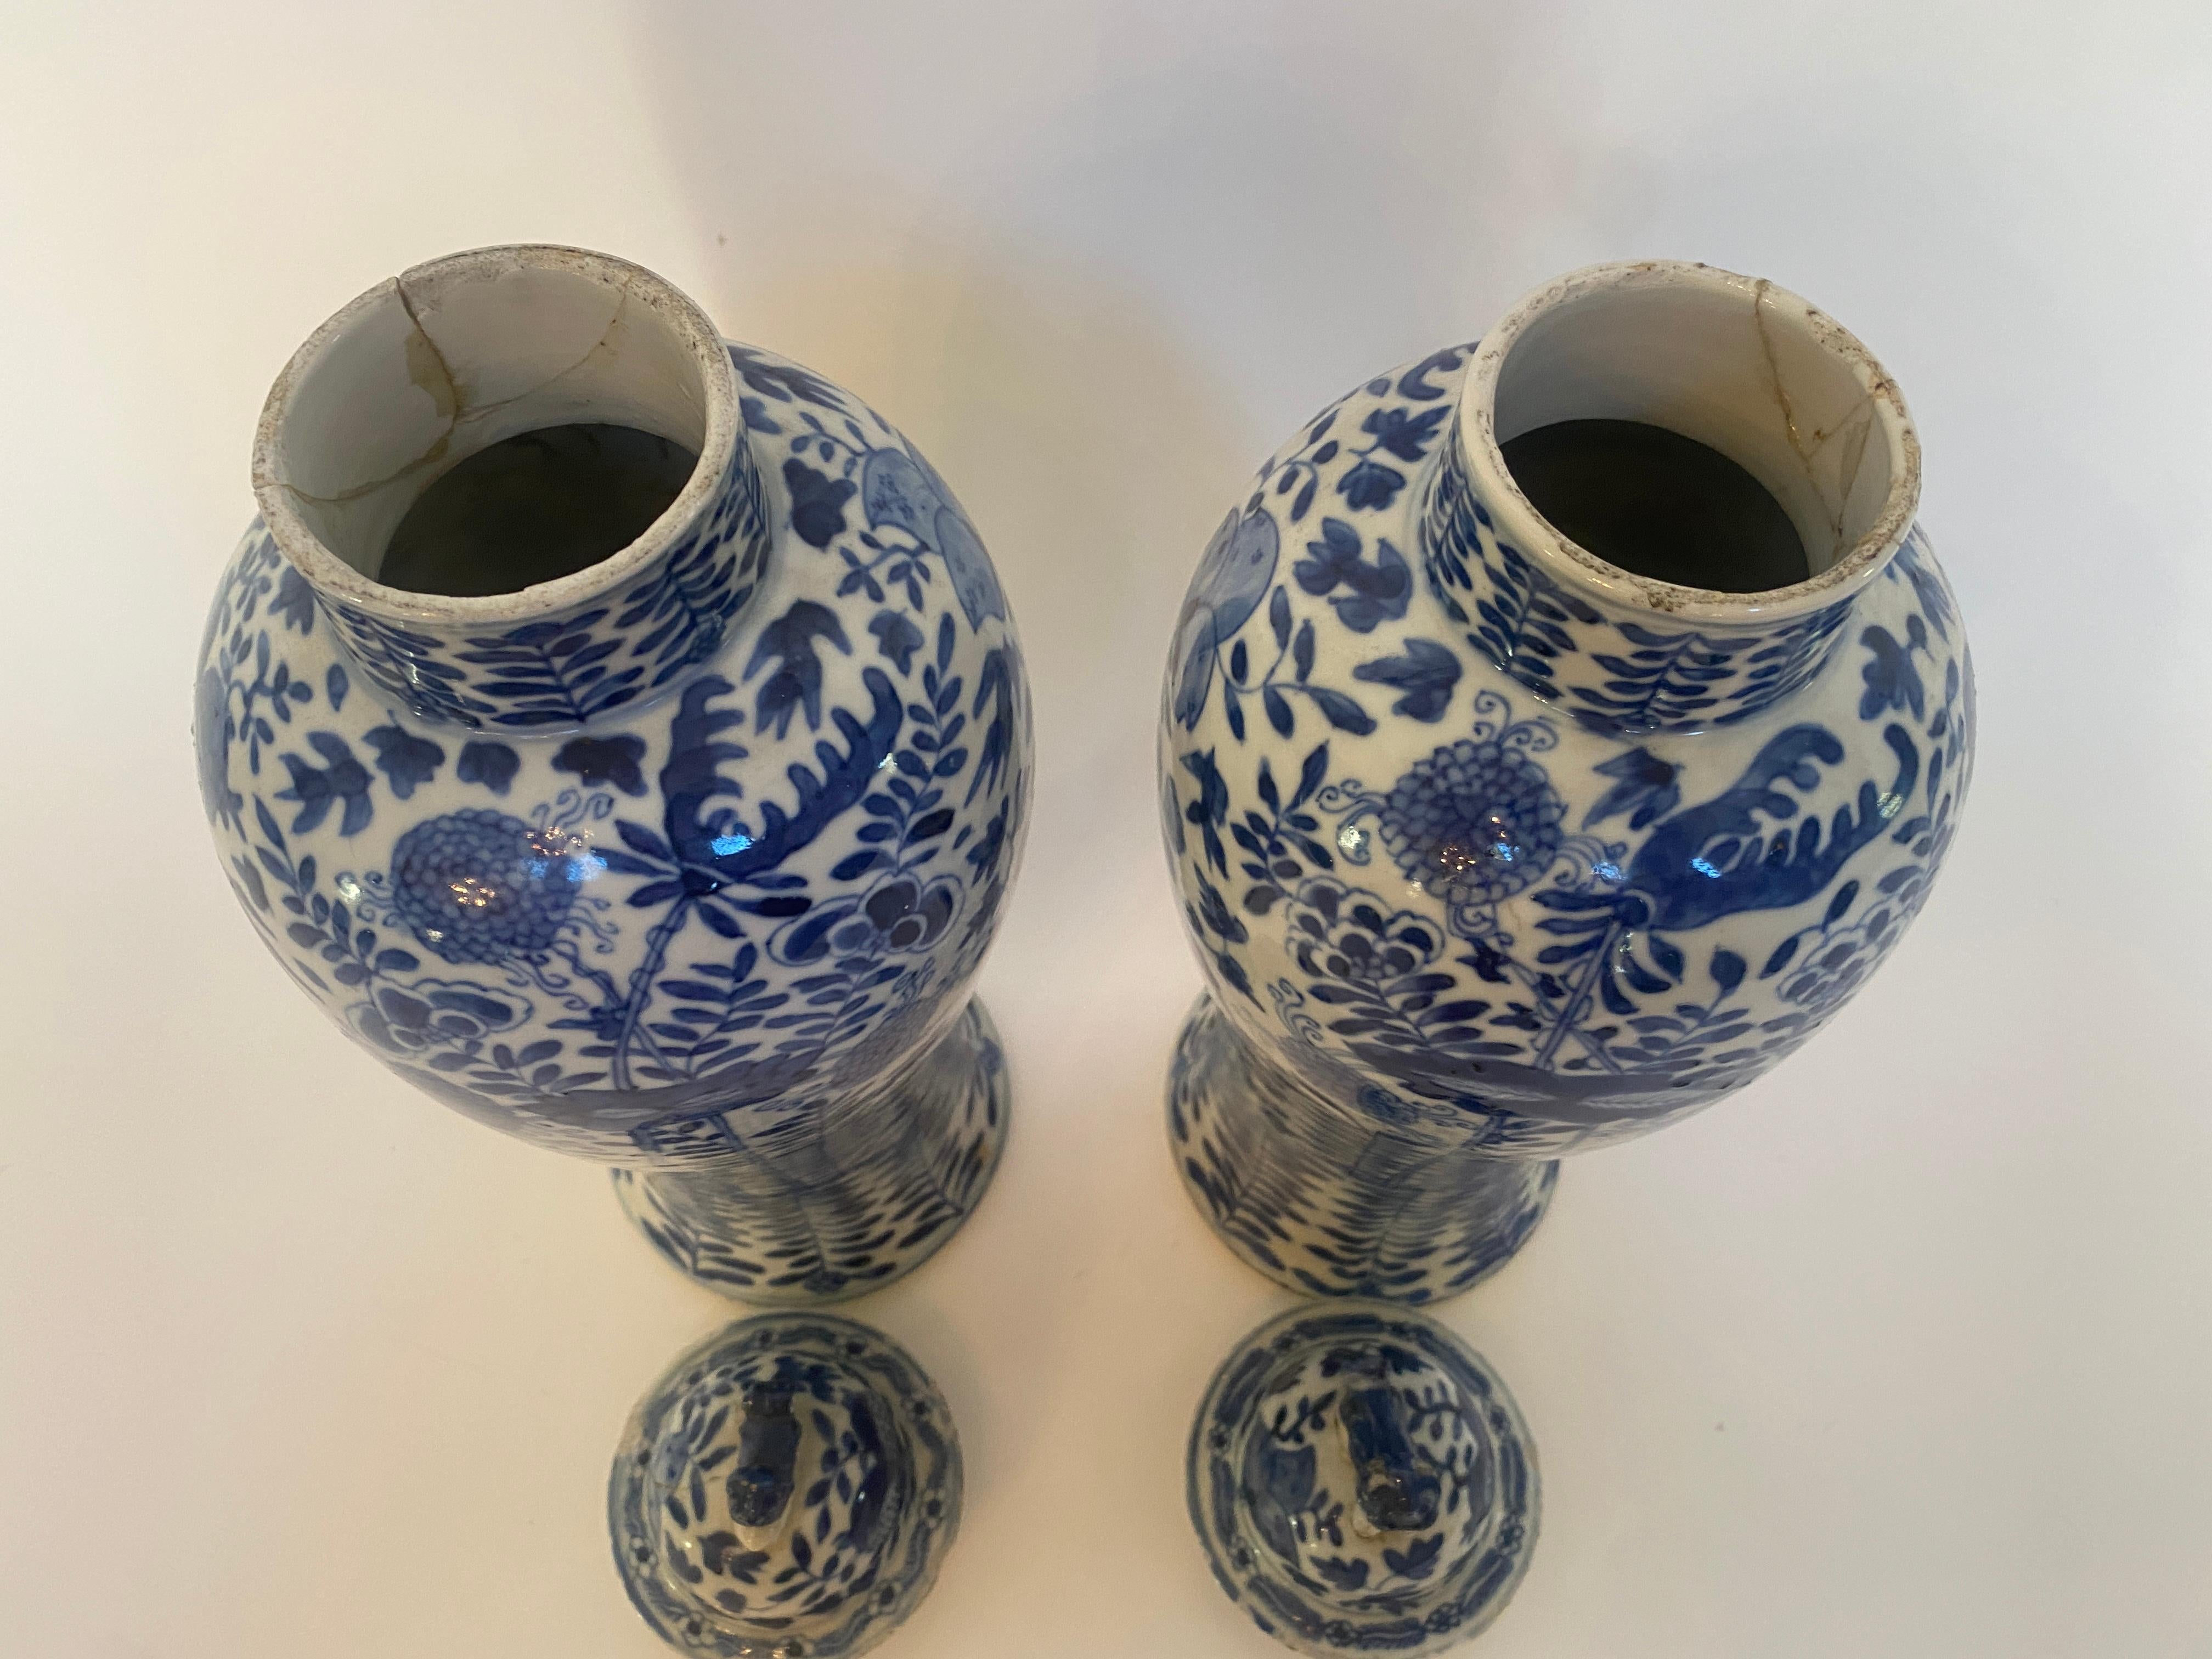 18th Century Antique Pair of Chinese Blue and White Porcelain Jars and Covers For Sale 1